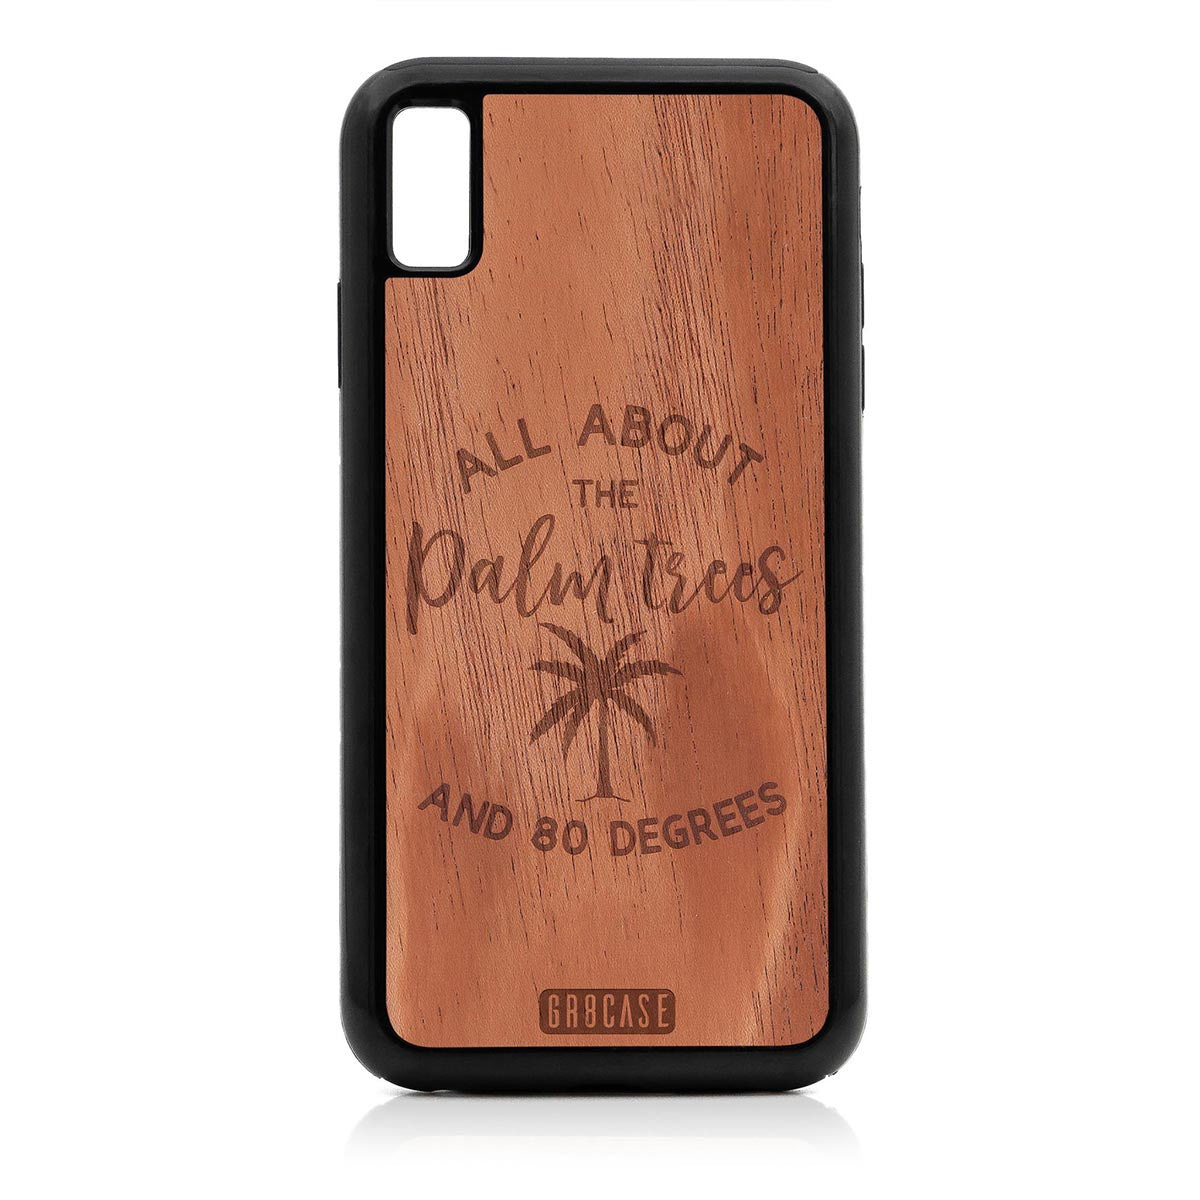 All About The Palm Trees and 80 Degrees Design Wood Case For iPhone XS Max Ultra by GR8CASE